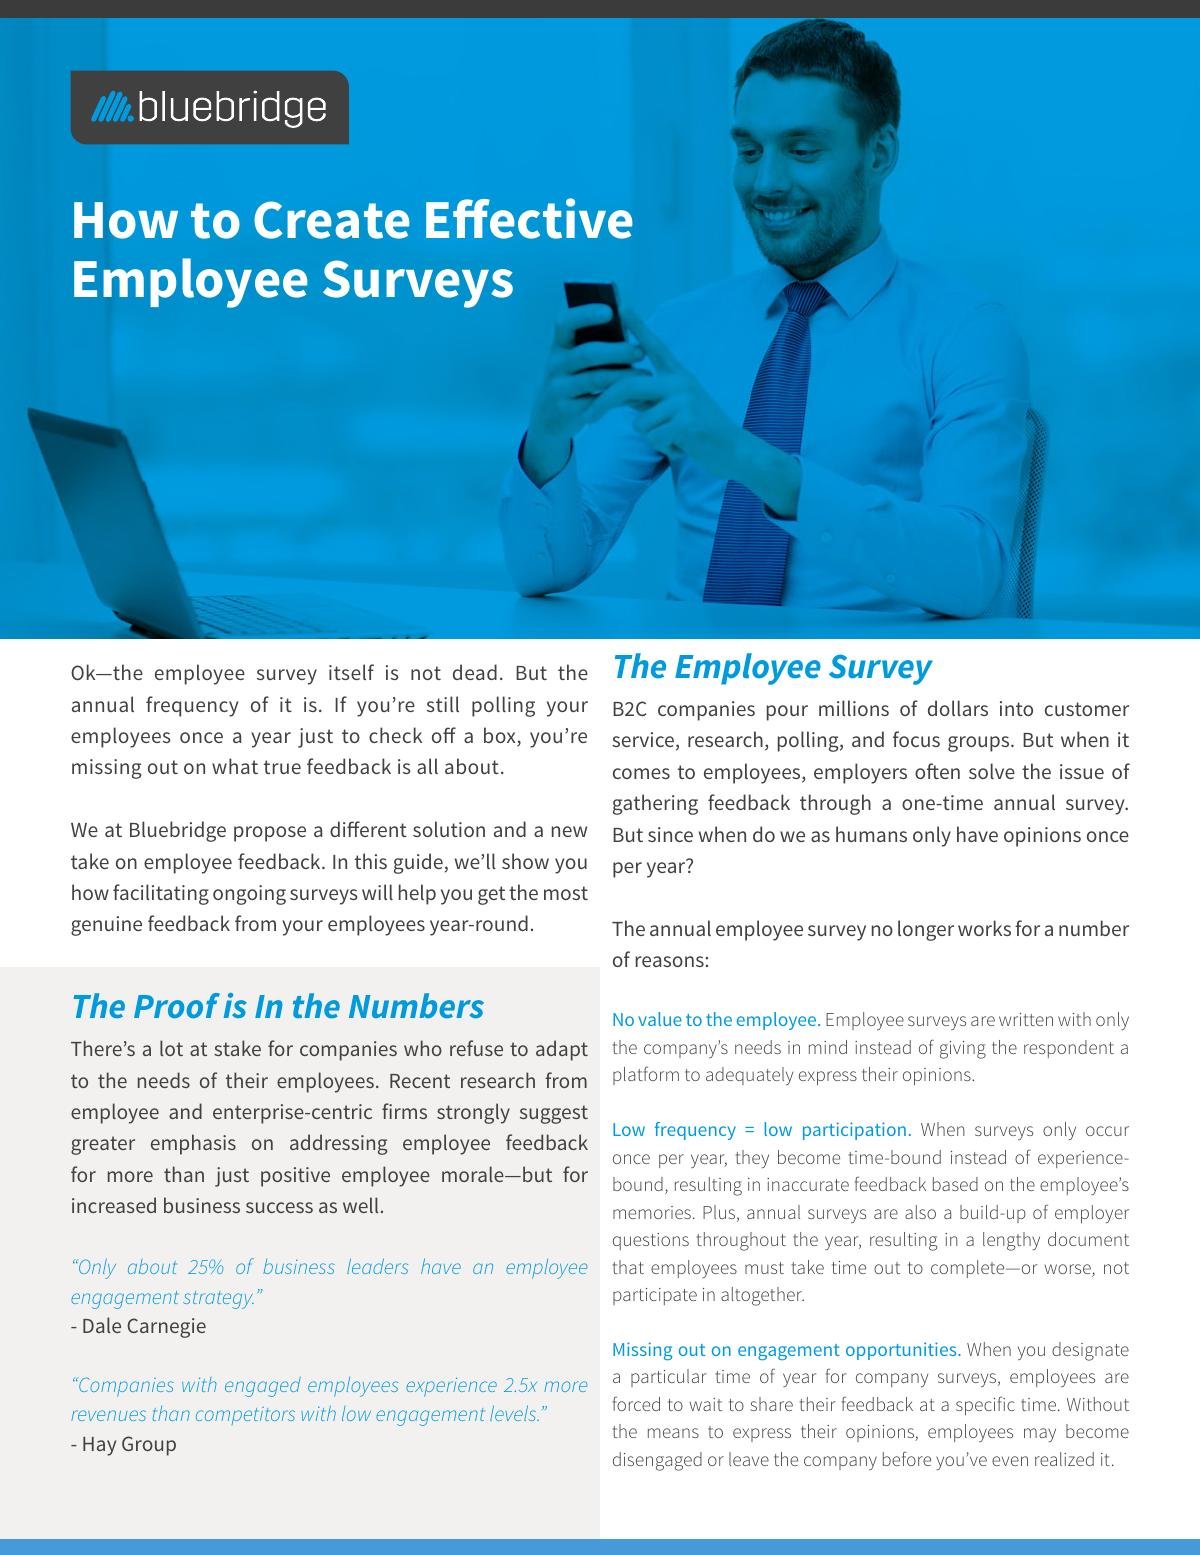 Guide to Effective Employee Surveys